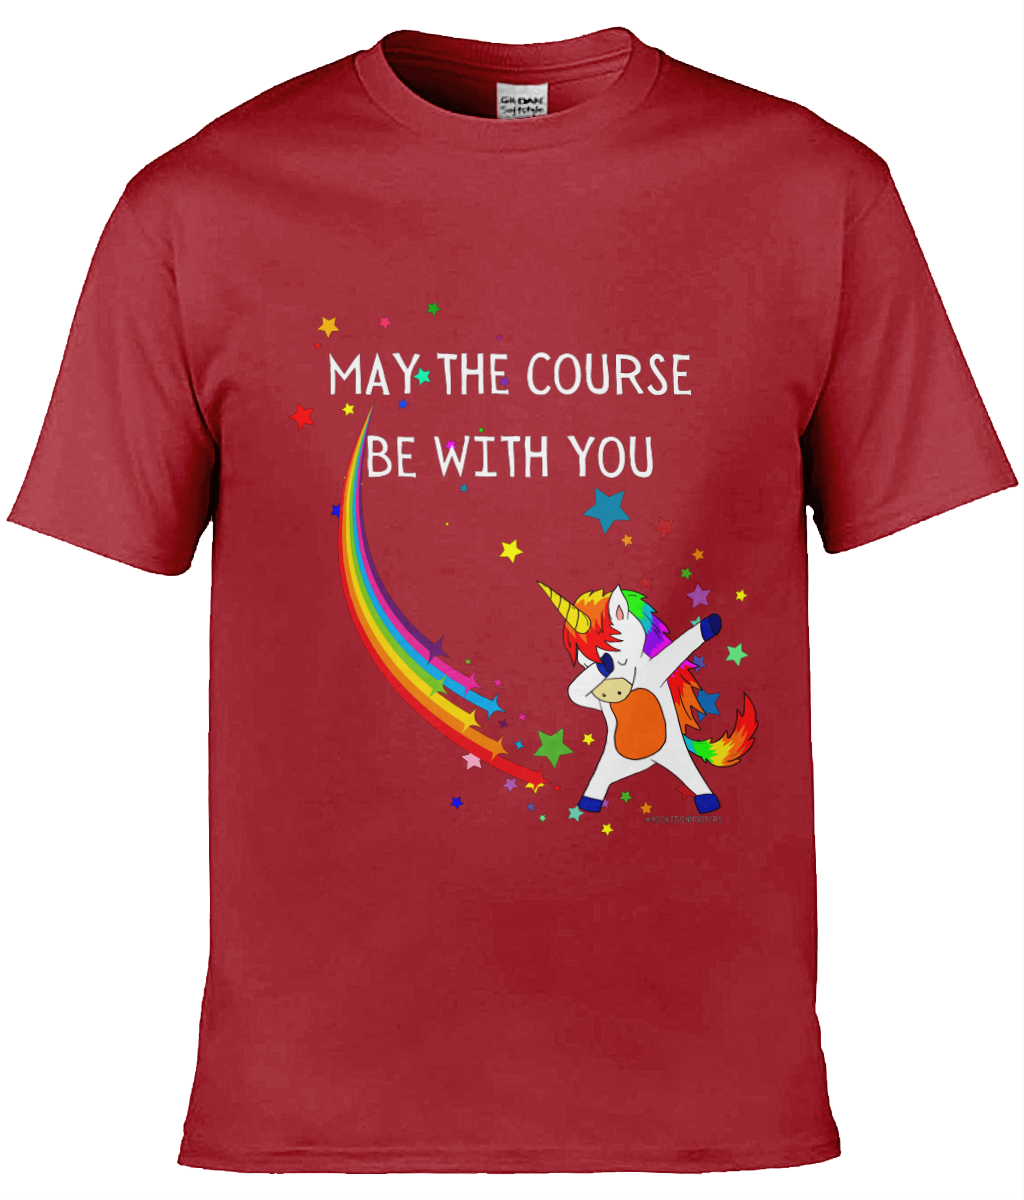 May the Course Tee Shirt